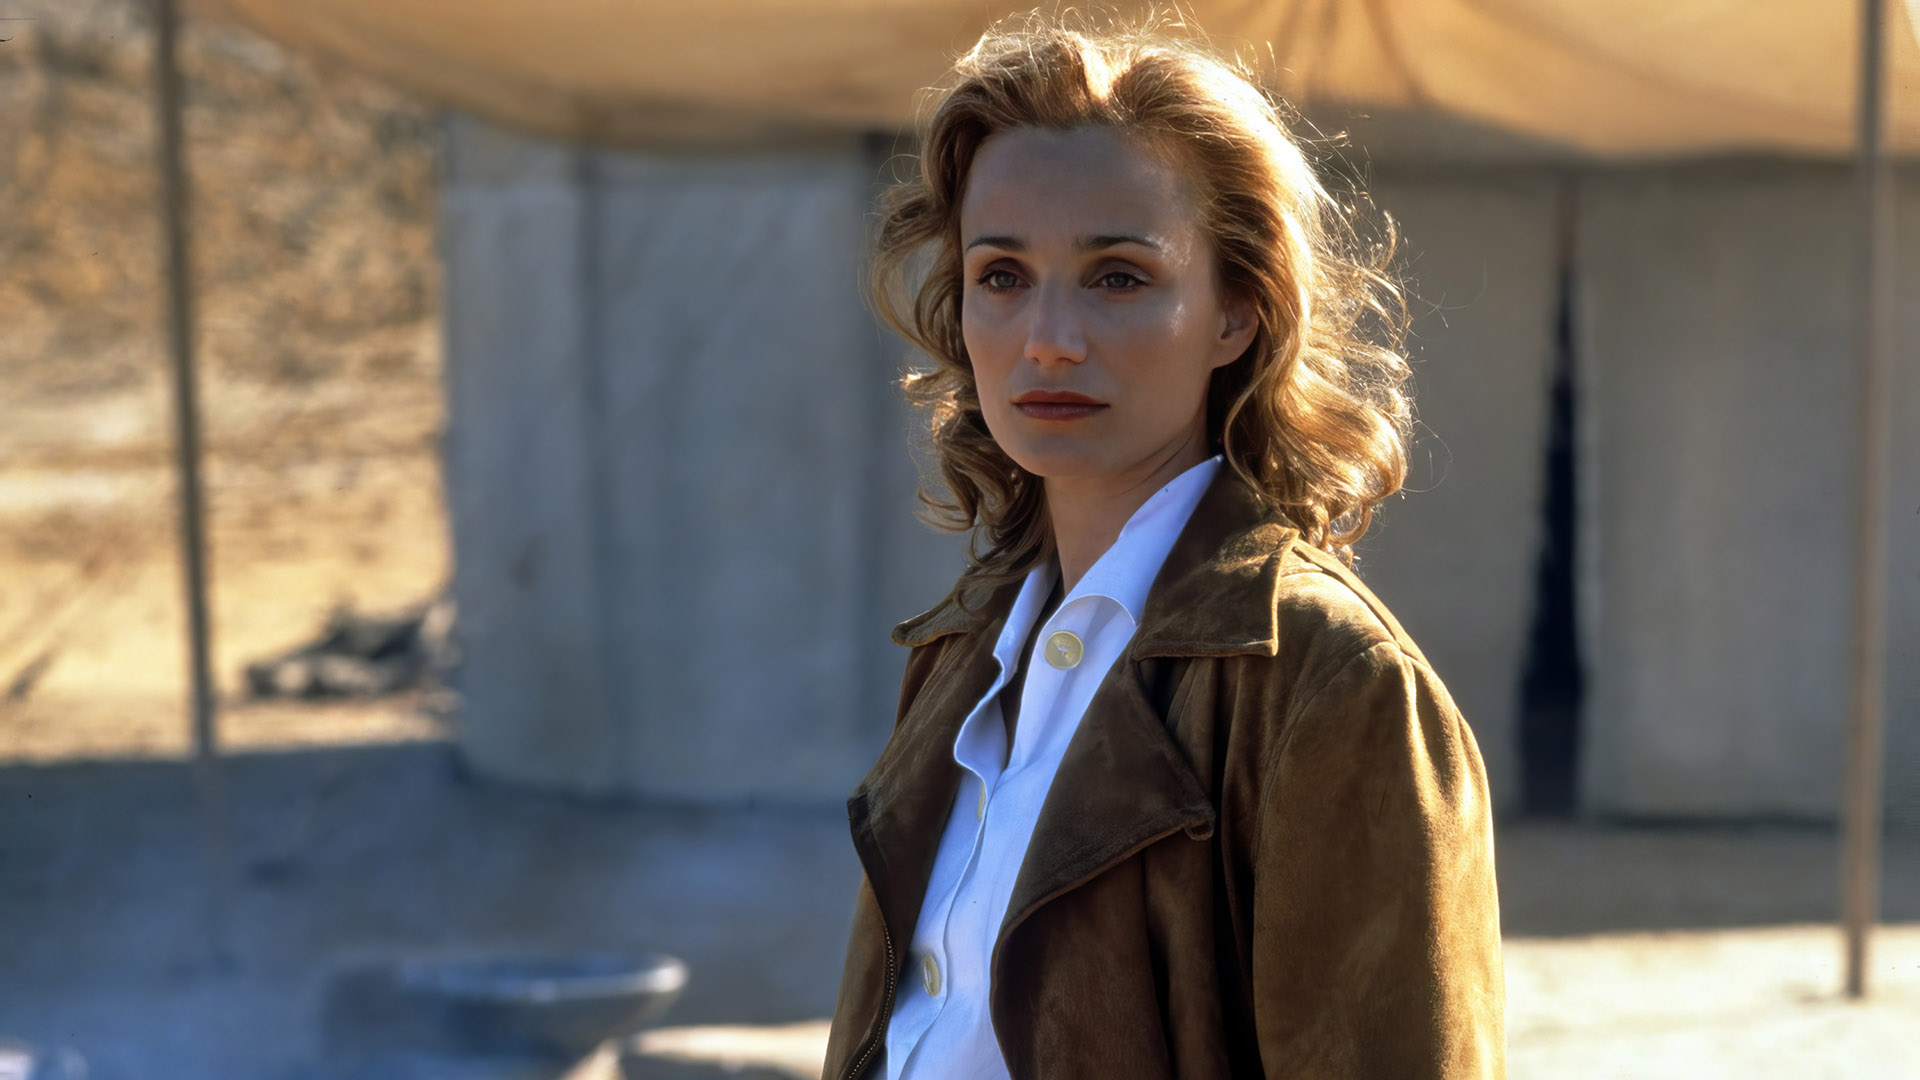 8 Underrated Kristin Scott Thomas Movies Fans Need to See